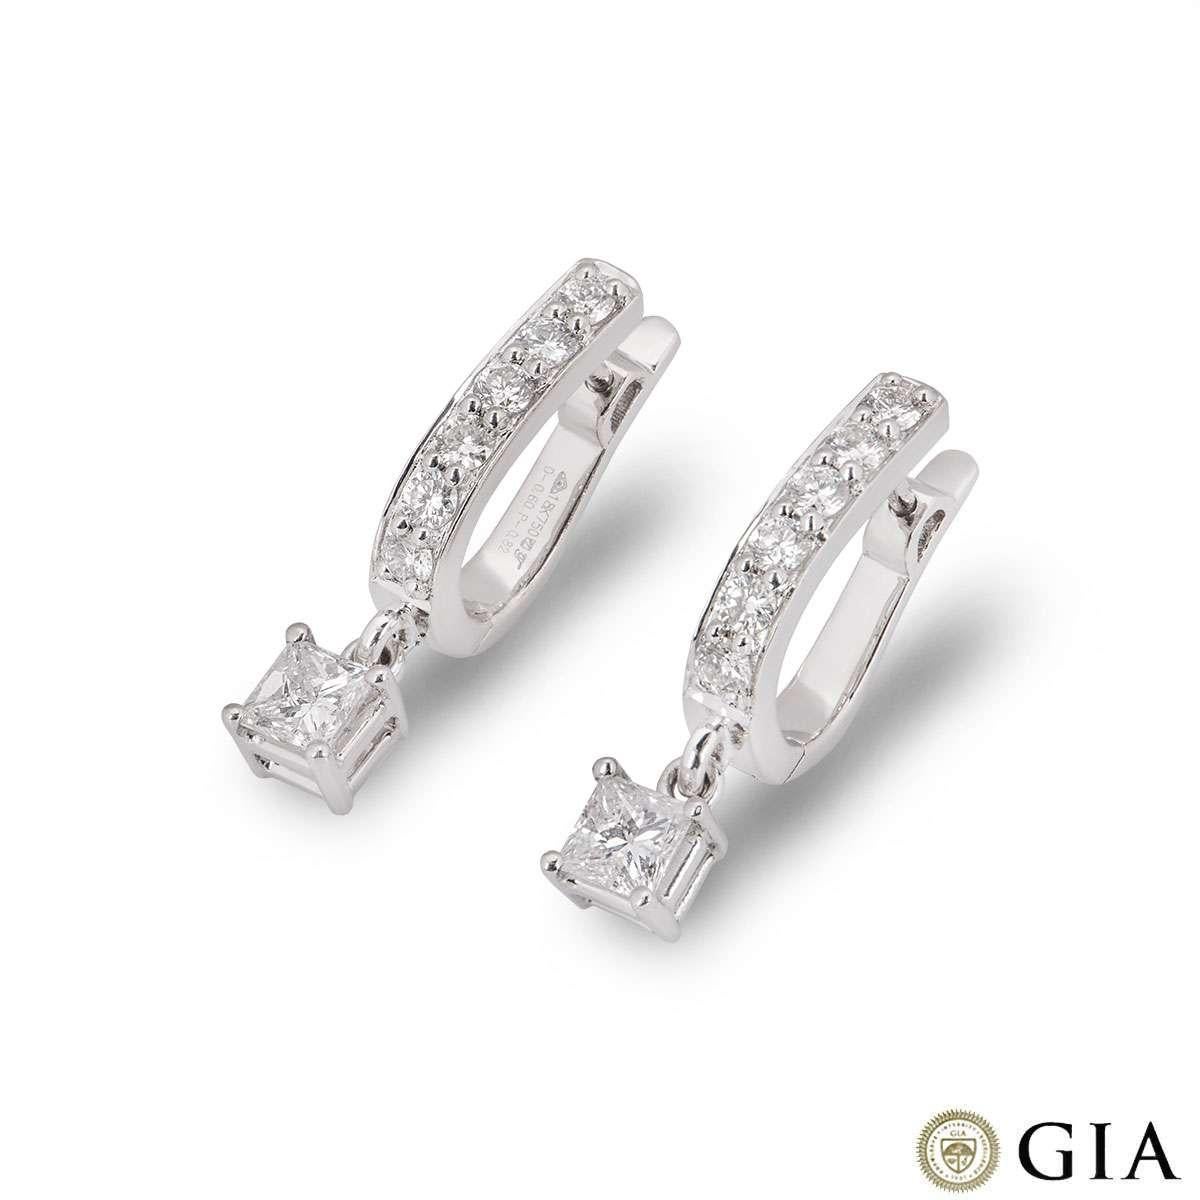 A pair of 18k white gold diamond drop earrings. The earrings each feature a hoop half set with 6 round brilliant cut diamonds totalling 0.60ct. Suspended from the hoop is a single princess cut diamond in a freely moving 4 claw setting. Both diamonds